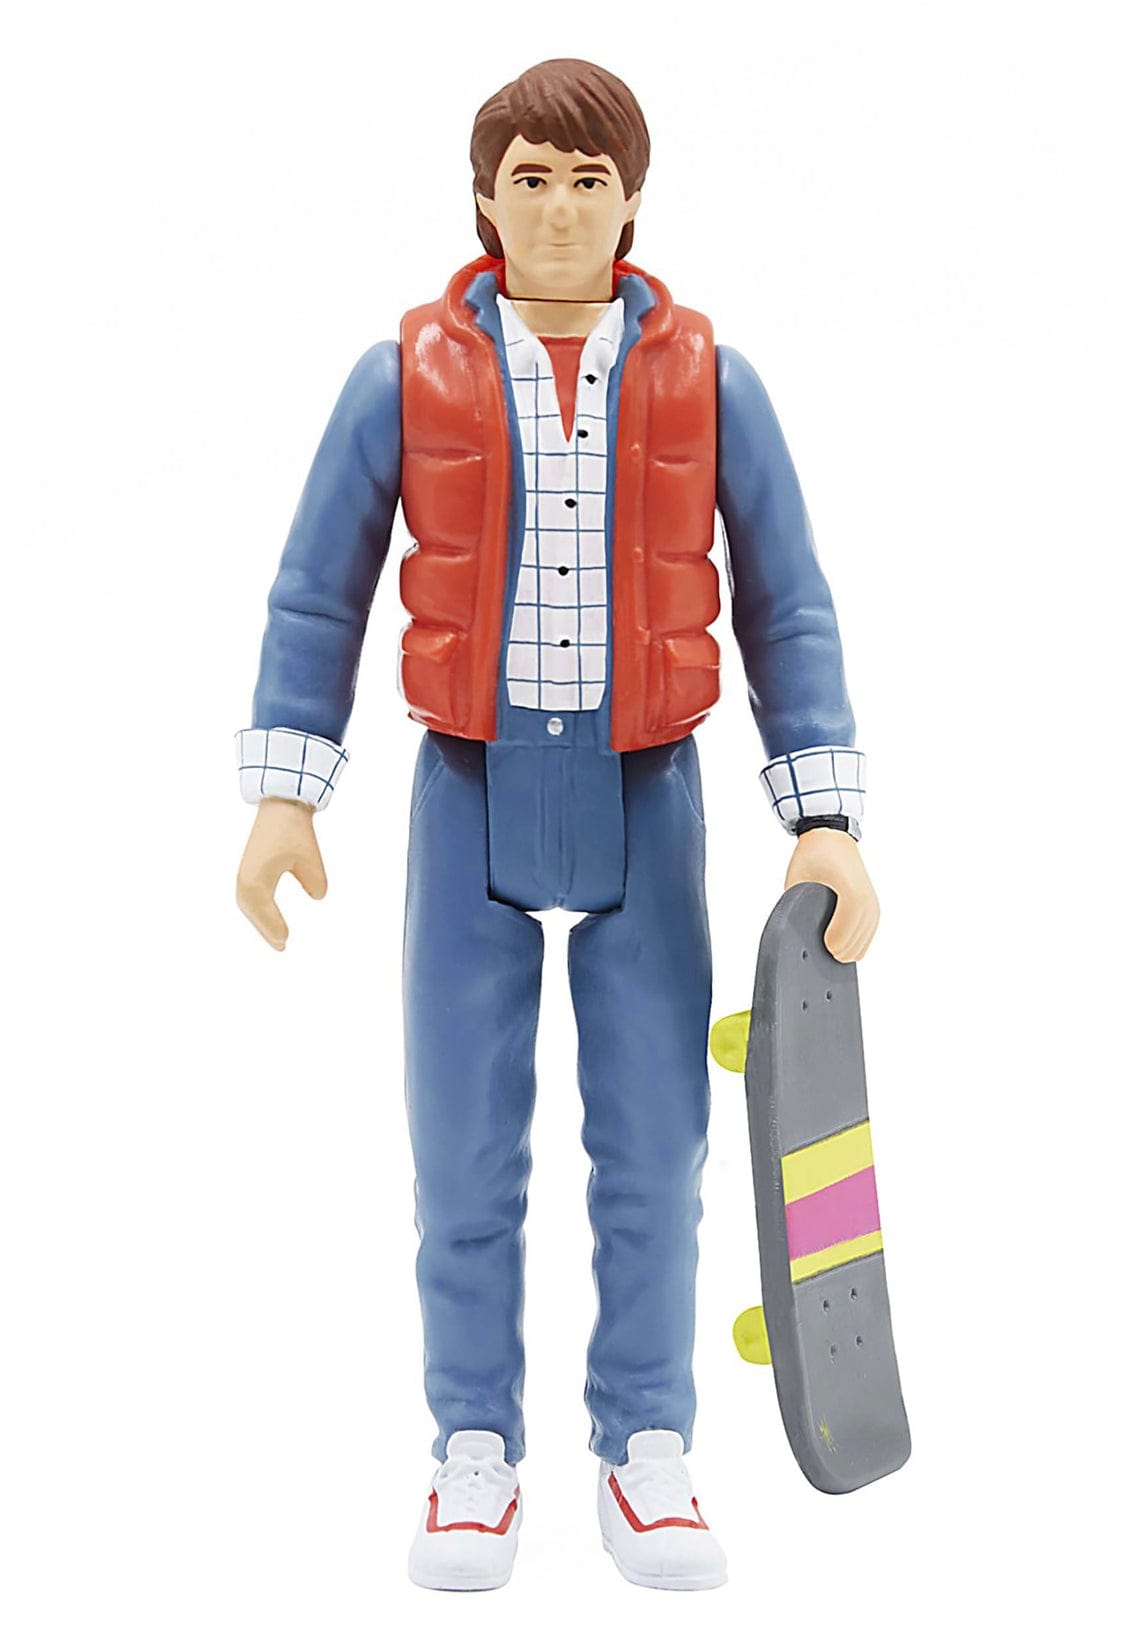 Reaction Figures - Back To The Future 1 - Marty McFly 1980's